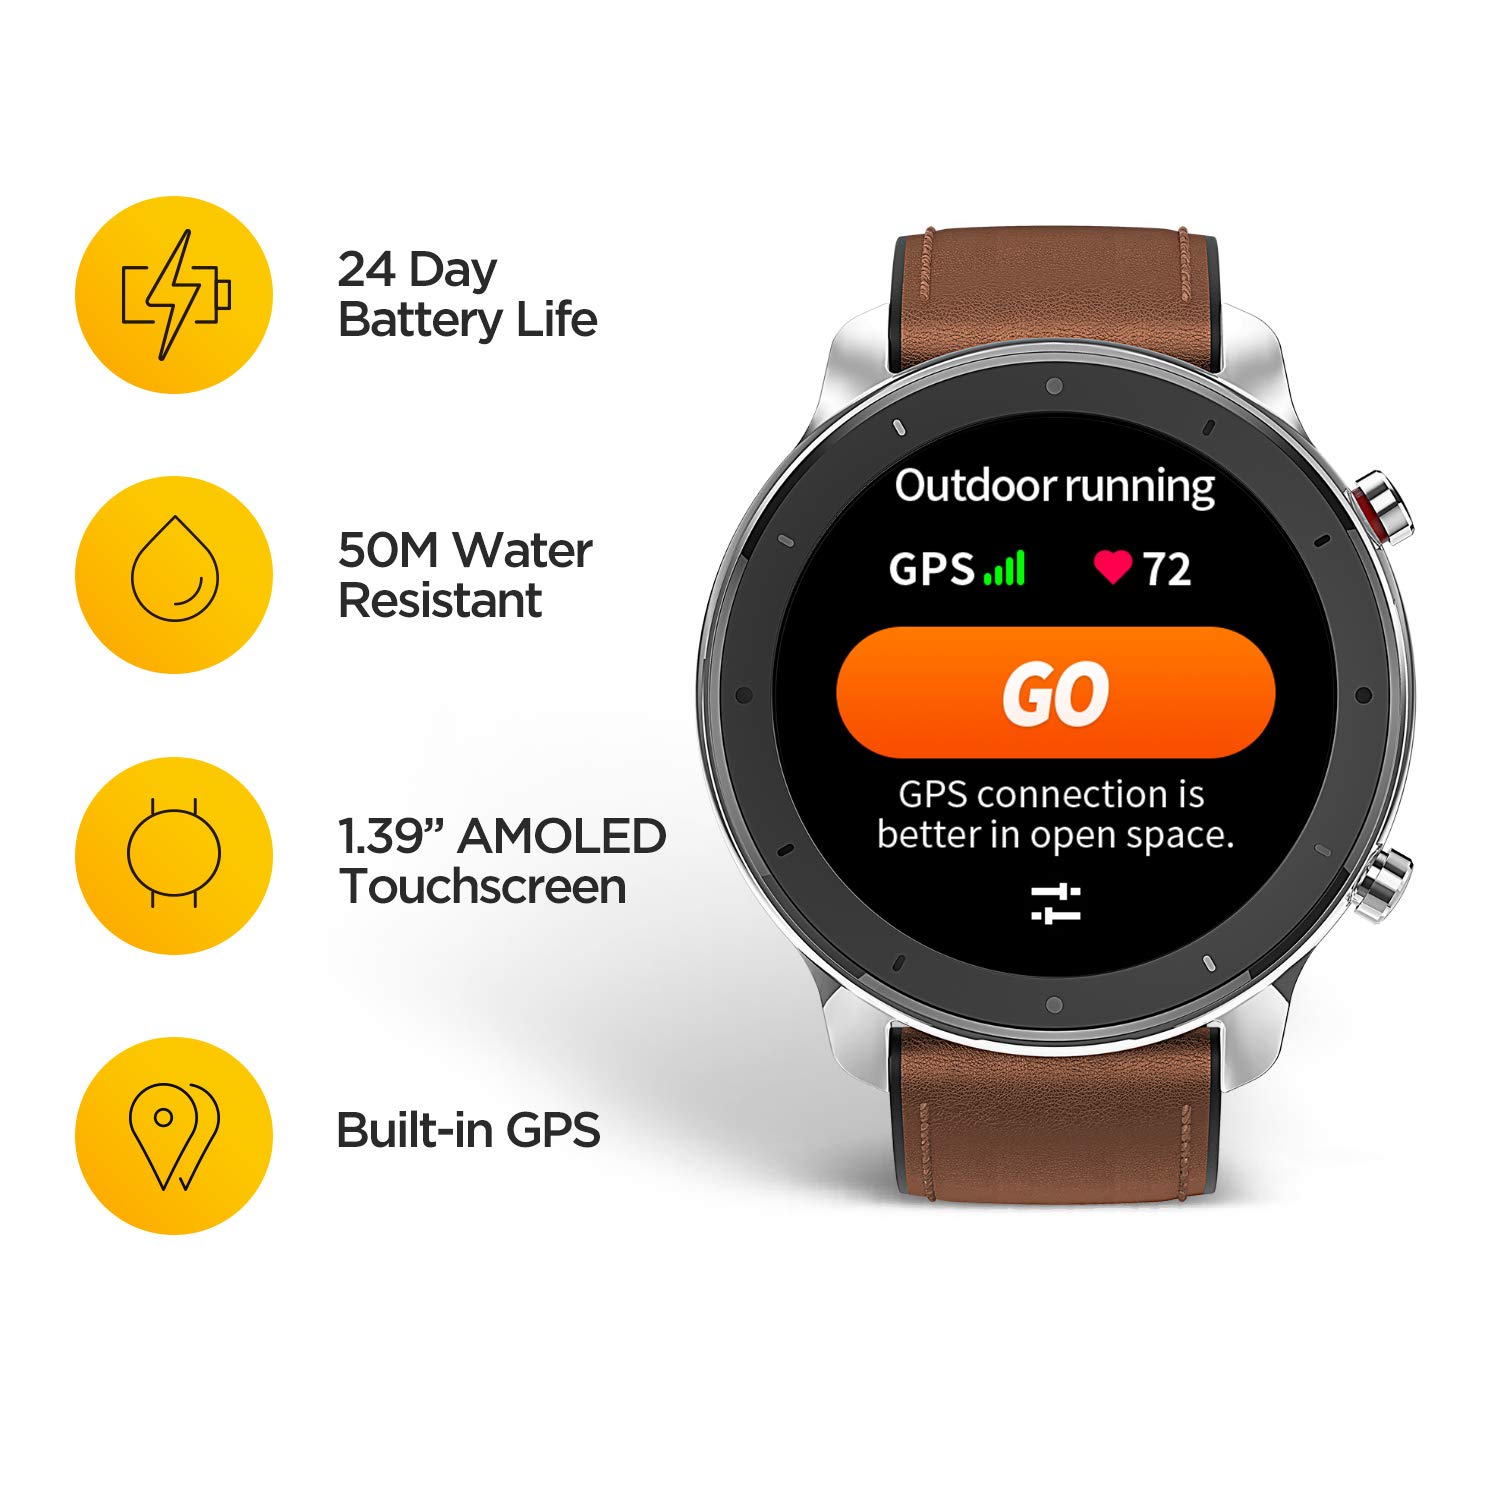 Amazfit GTR Smartwatch, 1.39'' AMOLDED Display 24/7 Heart Rate Monitor, 24 Day Batter Life, 12 Sports Modes(47mm, GPS, Bluetooth), Titanium